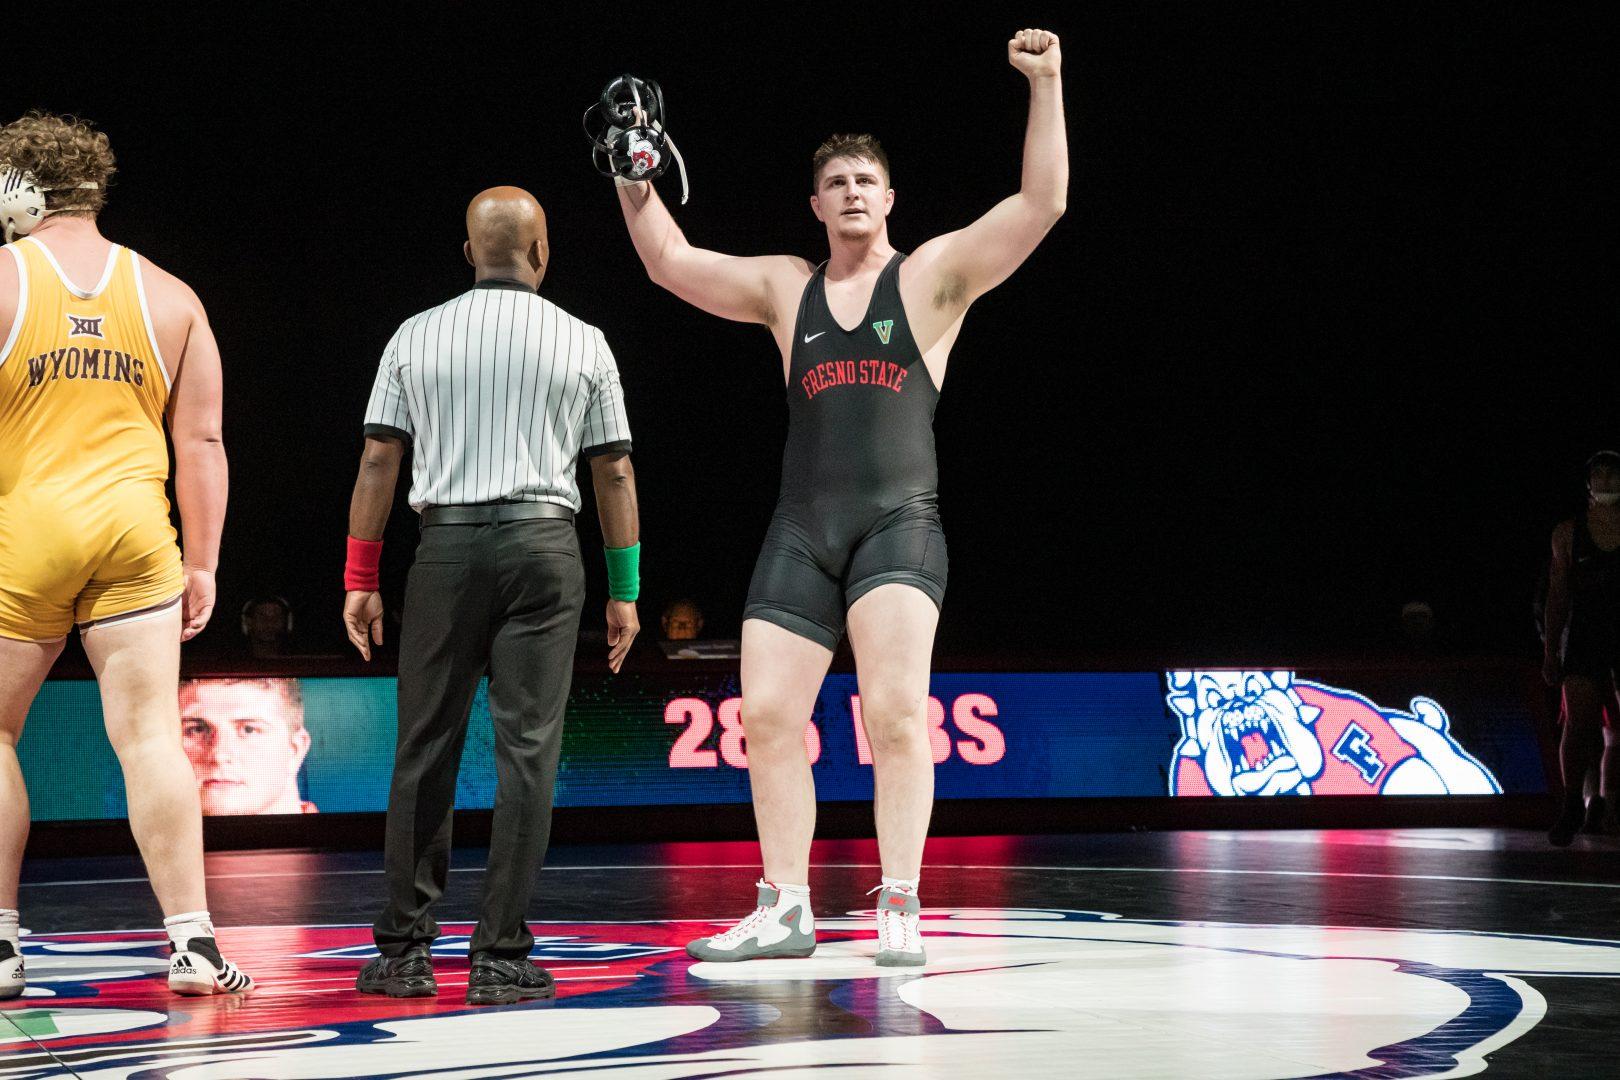 Fresno State wrestler AJ Nevills celebrates a victory in his match in a dual at home against No. 11 ranked Wyoming, Feb. 3, 2019. (Keith Kountz/Fresno State Athletics)